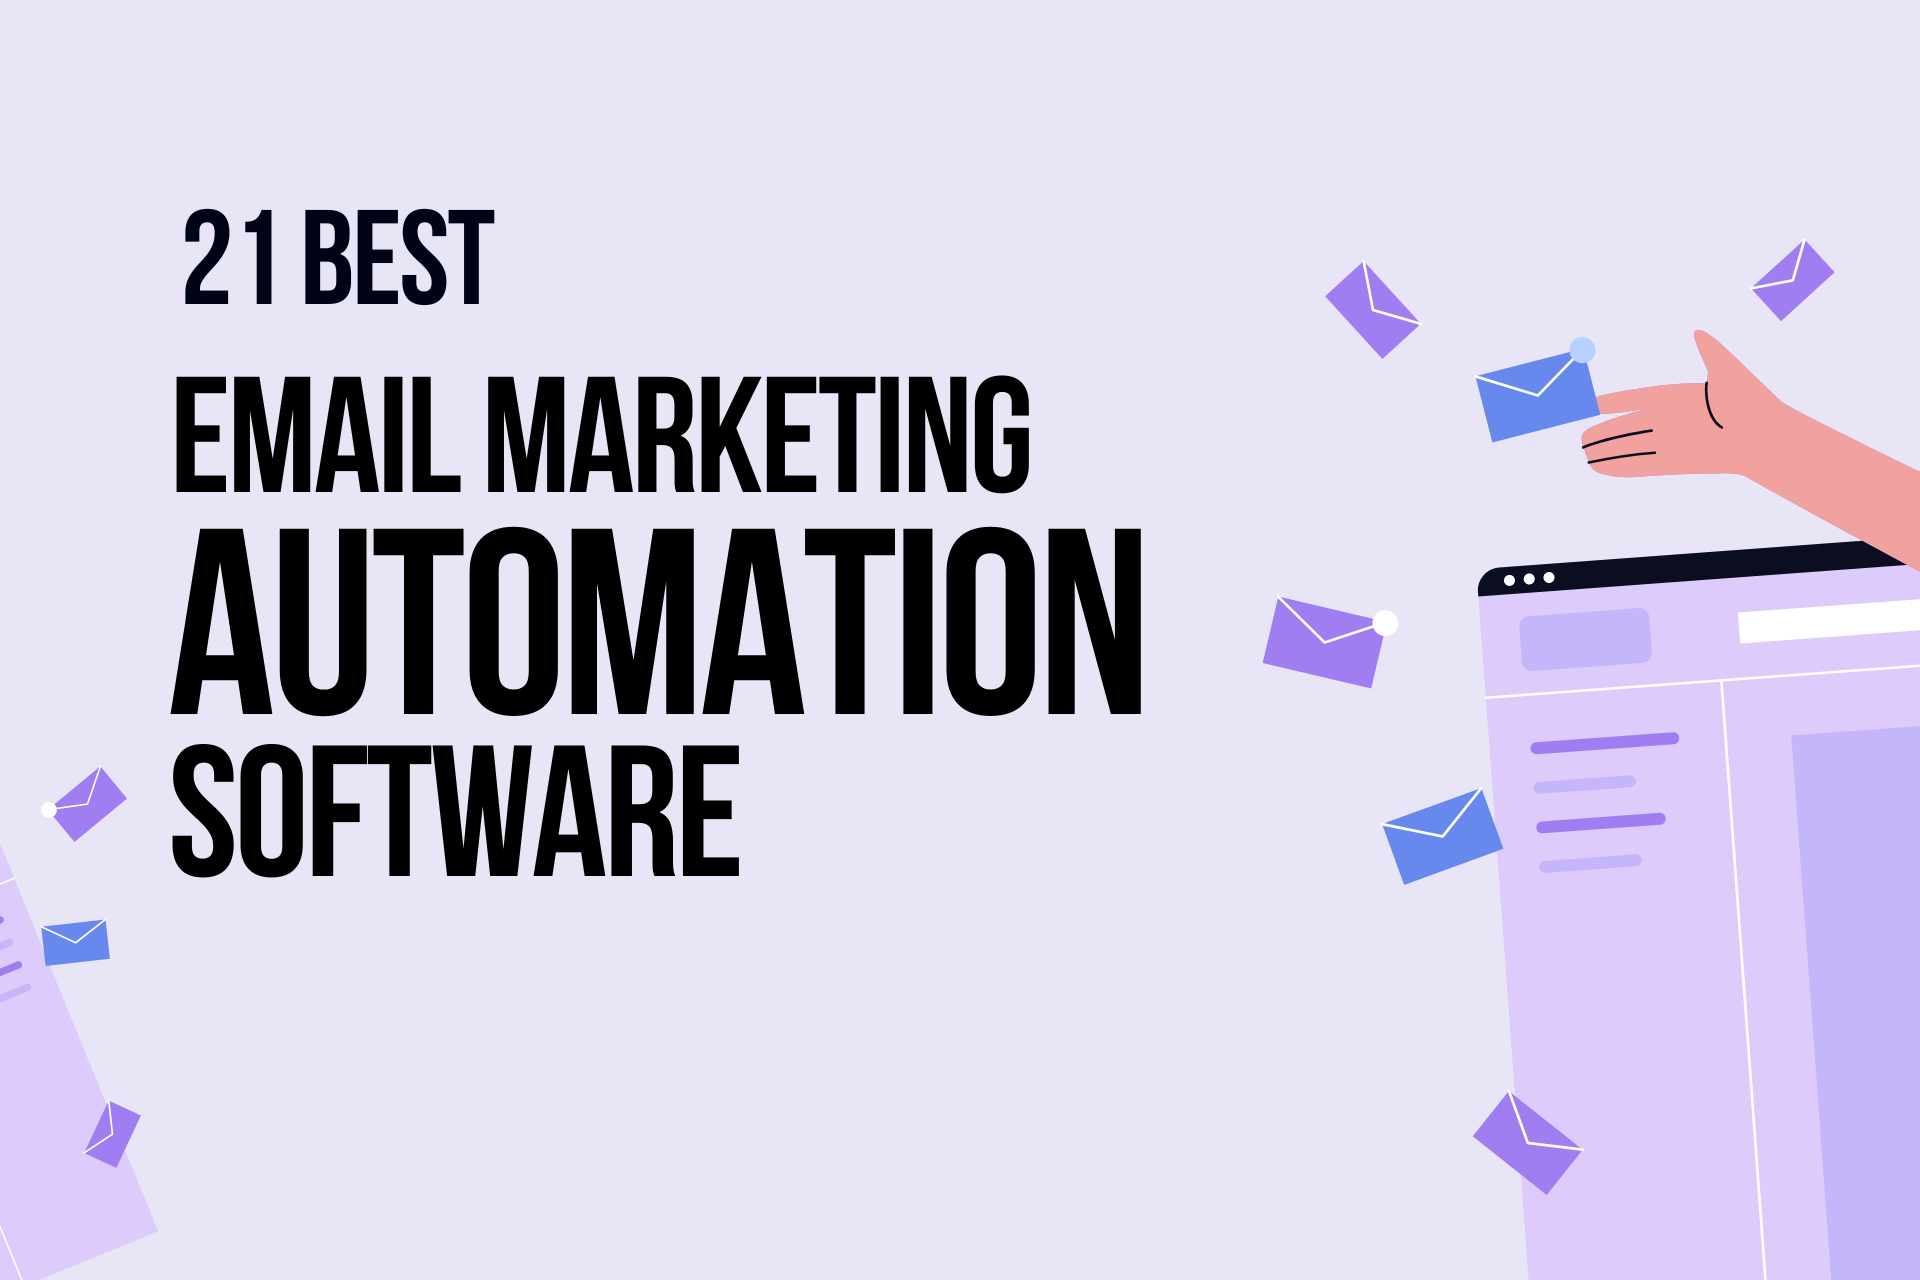 21 Best Email Marketing Automation Software